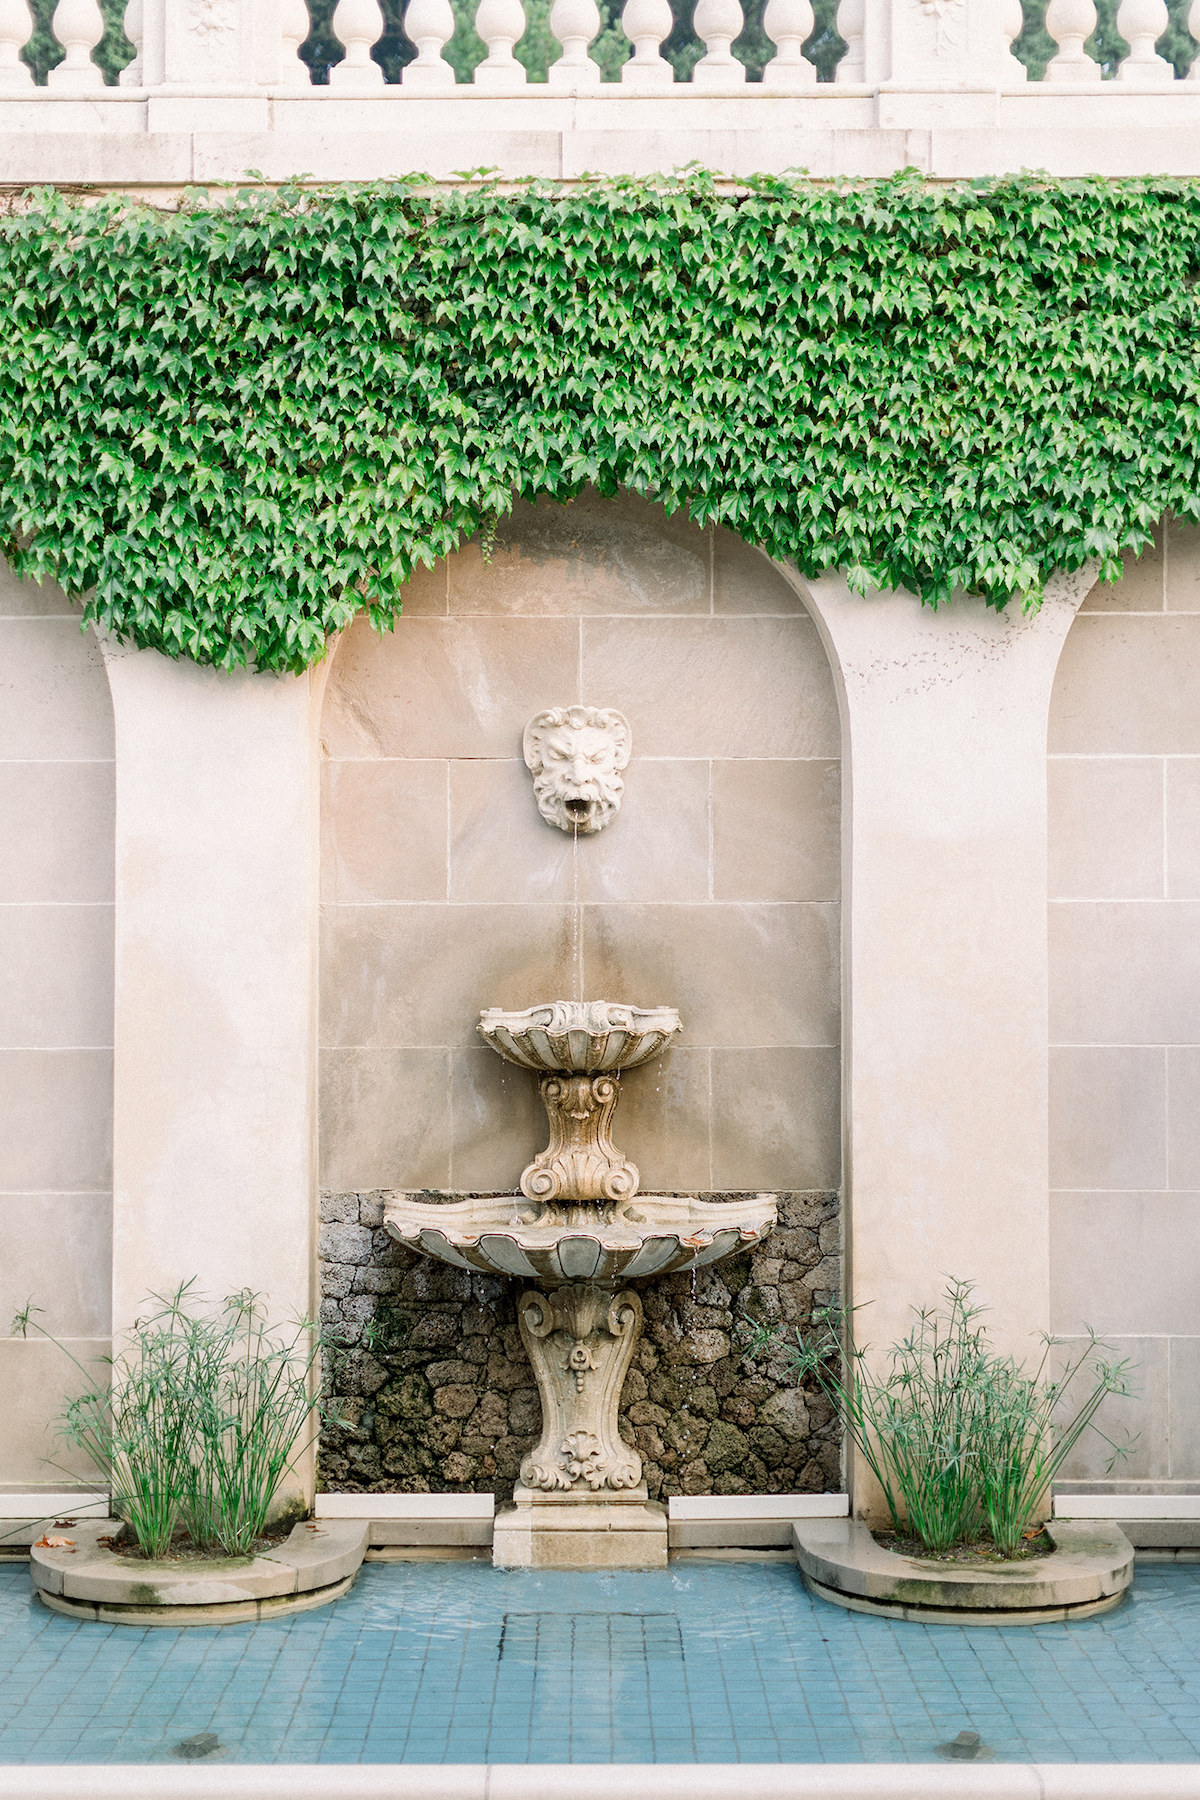 Architectural beauty on display at Longwood Gardens, with intricate details and textures that harmonize with the natural surroundings.